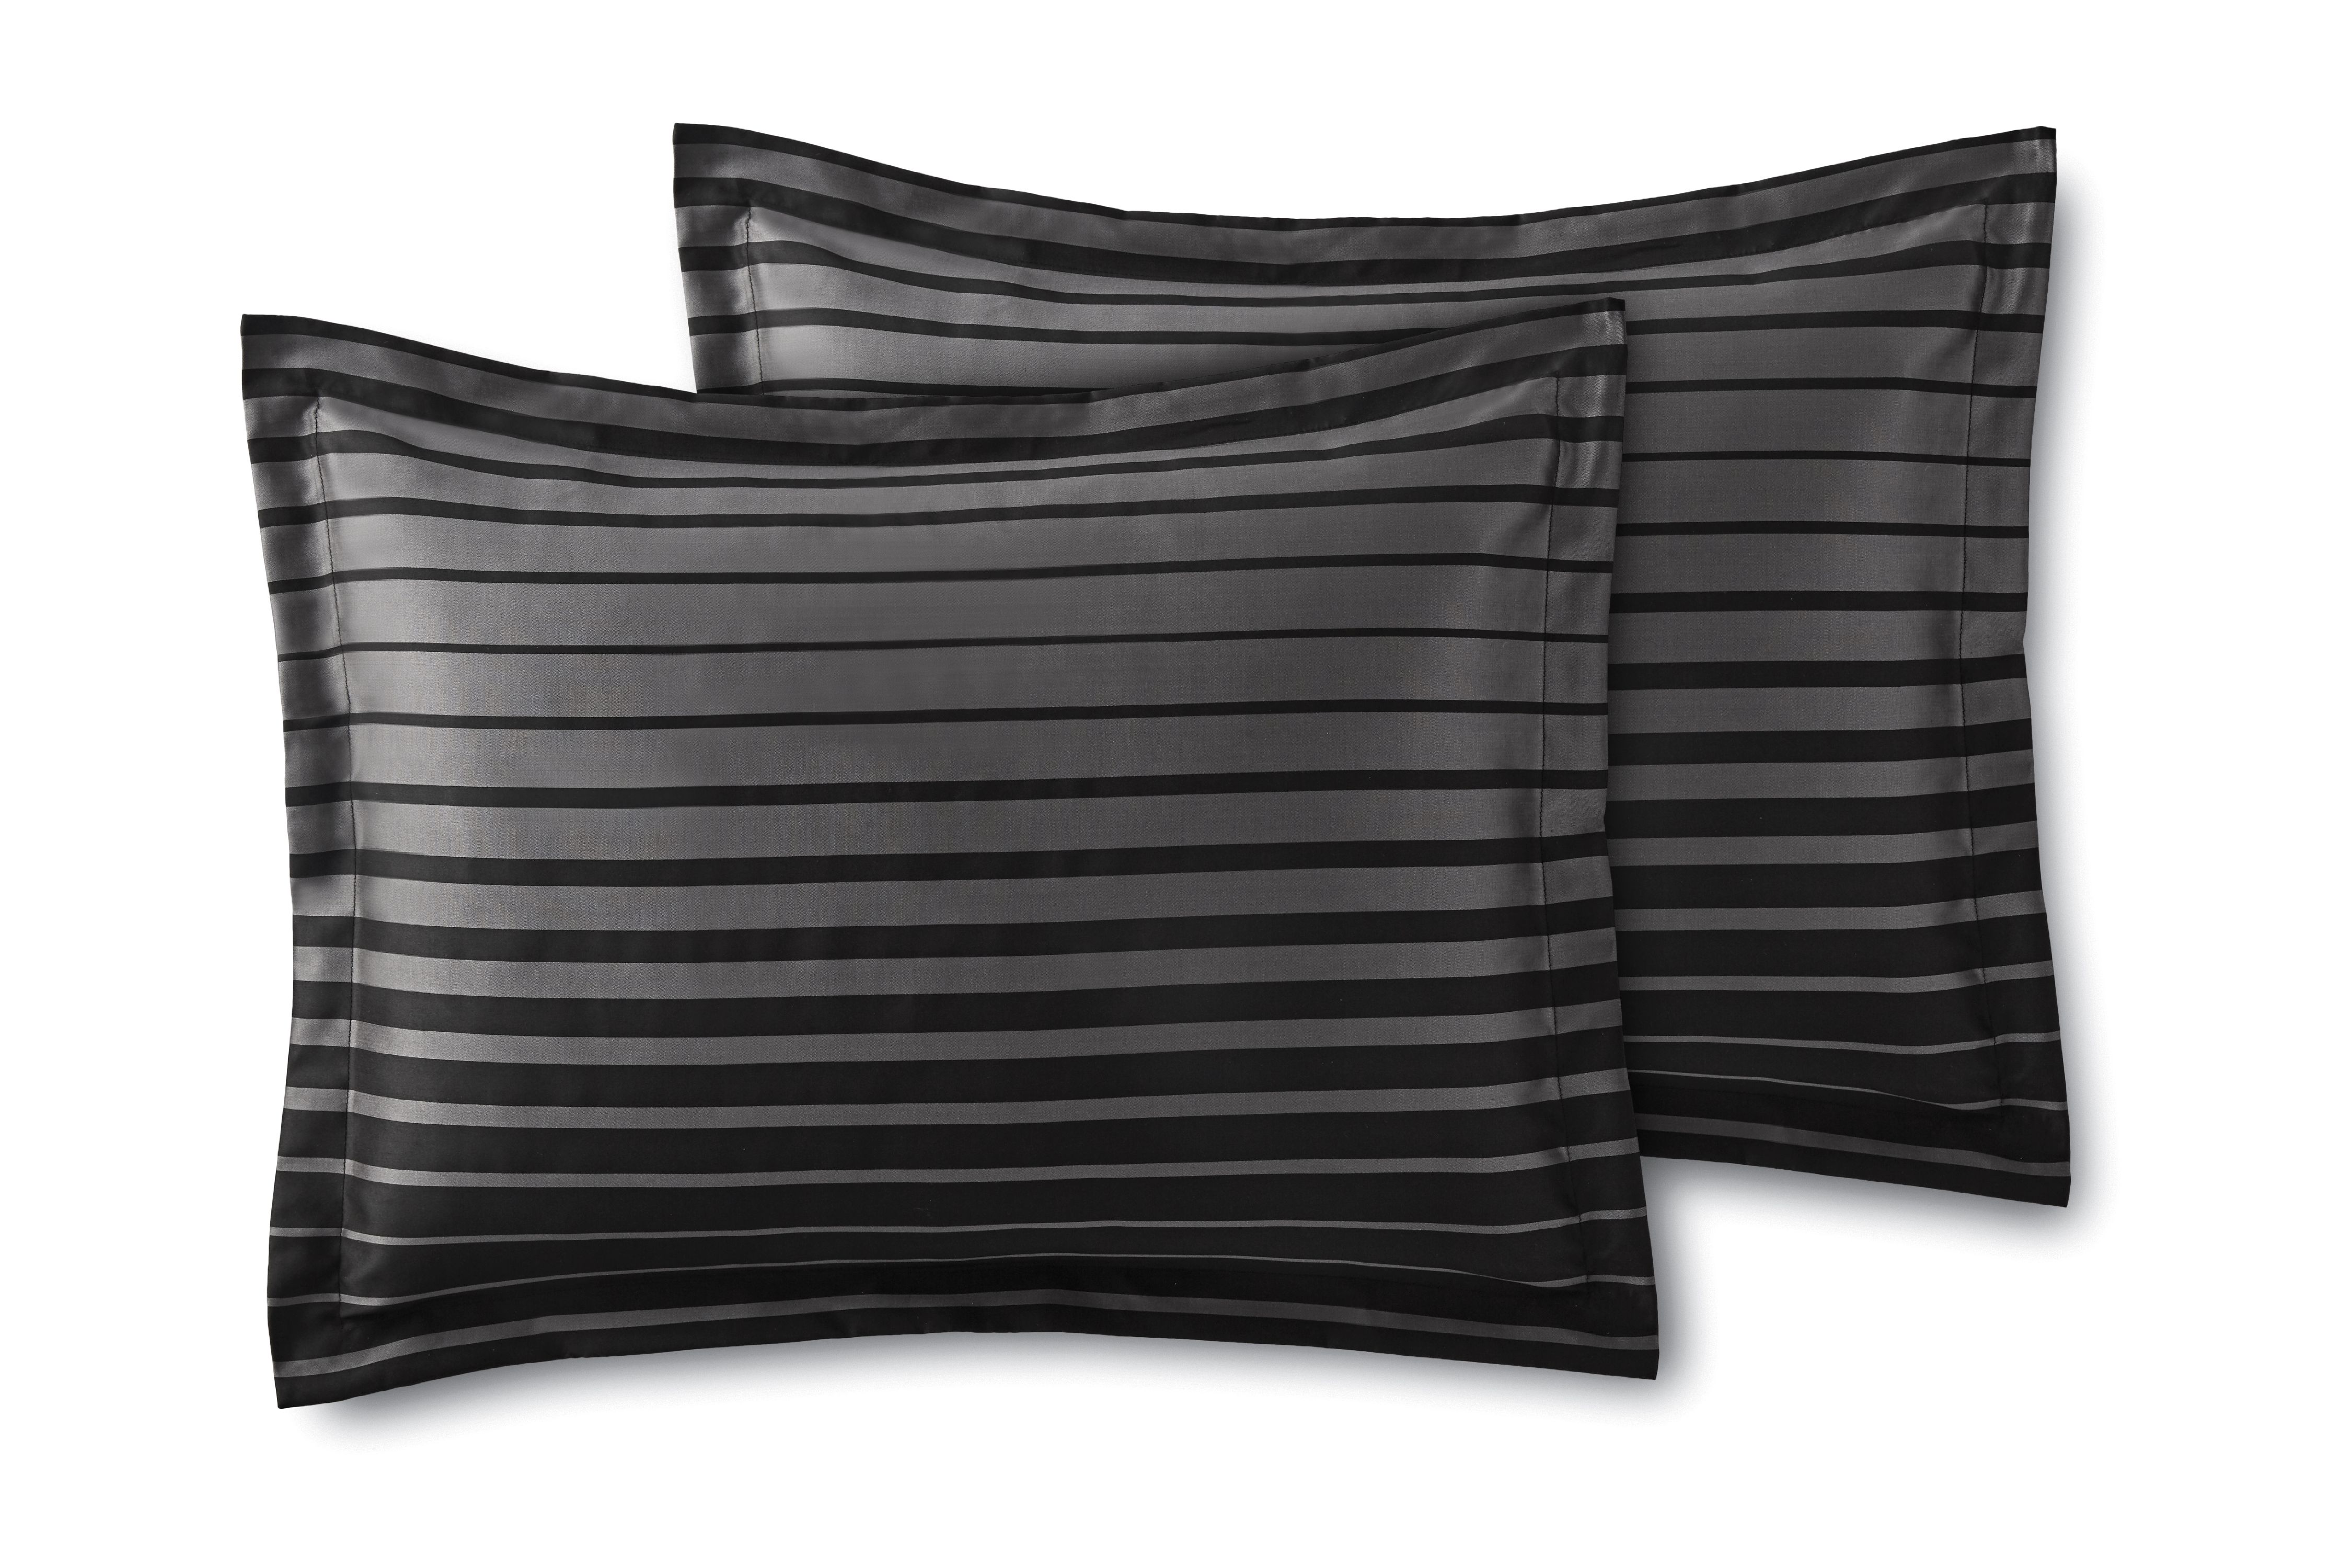 Mainstays 7-Piece Black Striped Midnight Woven Comforter Set, King - image 5 of 5